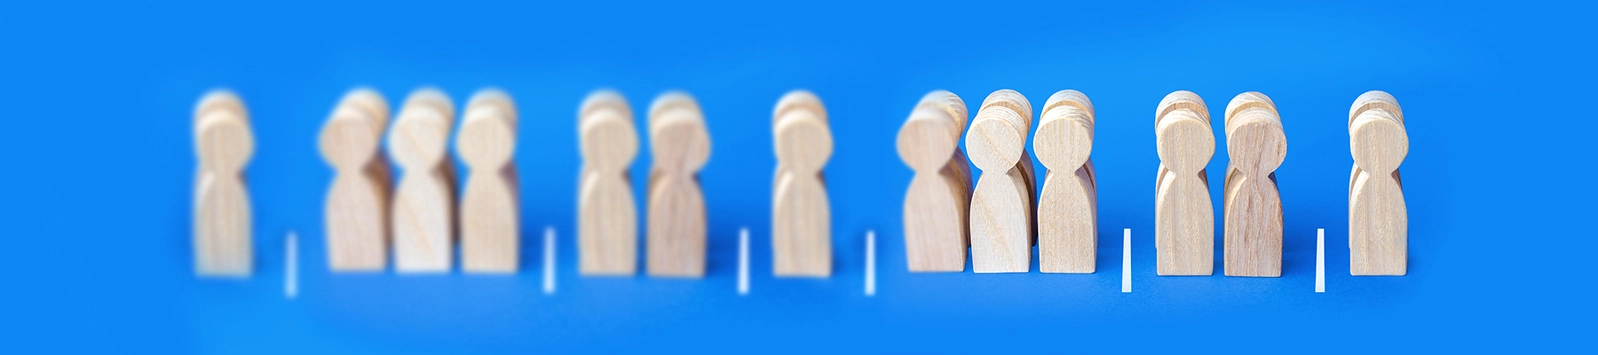 Wooden figures separated into groups